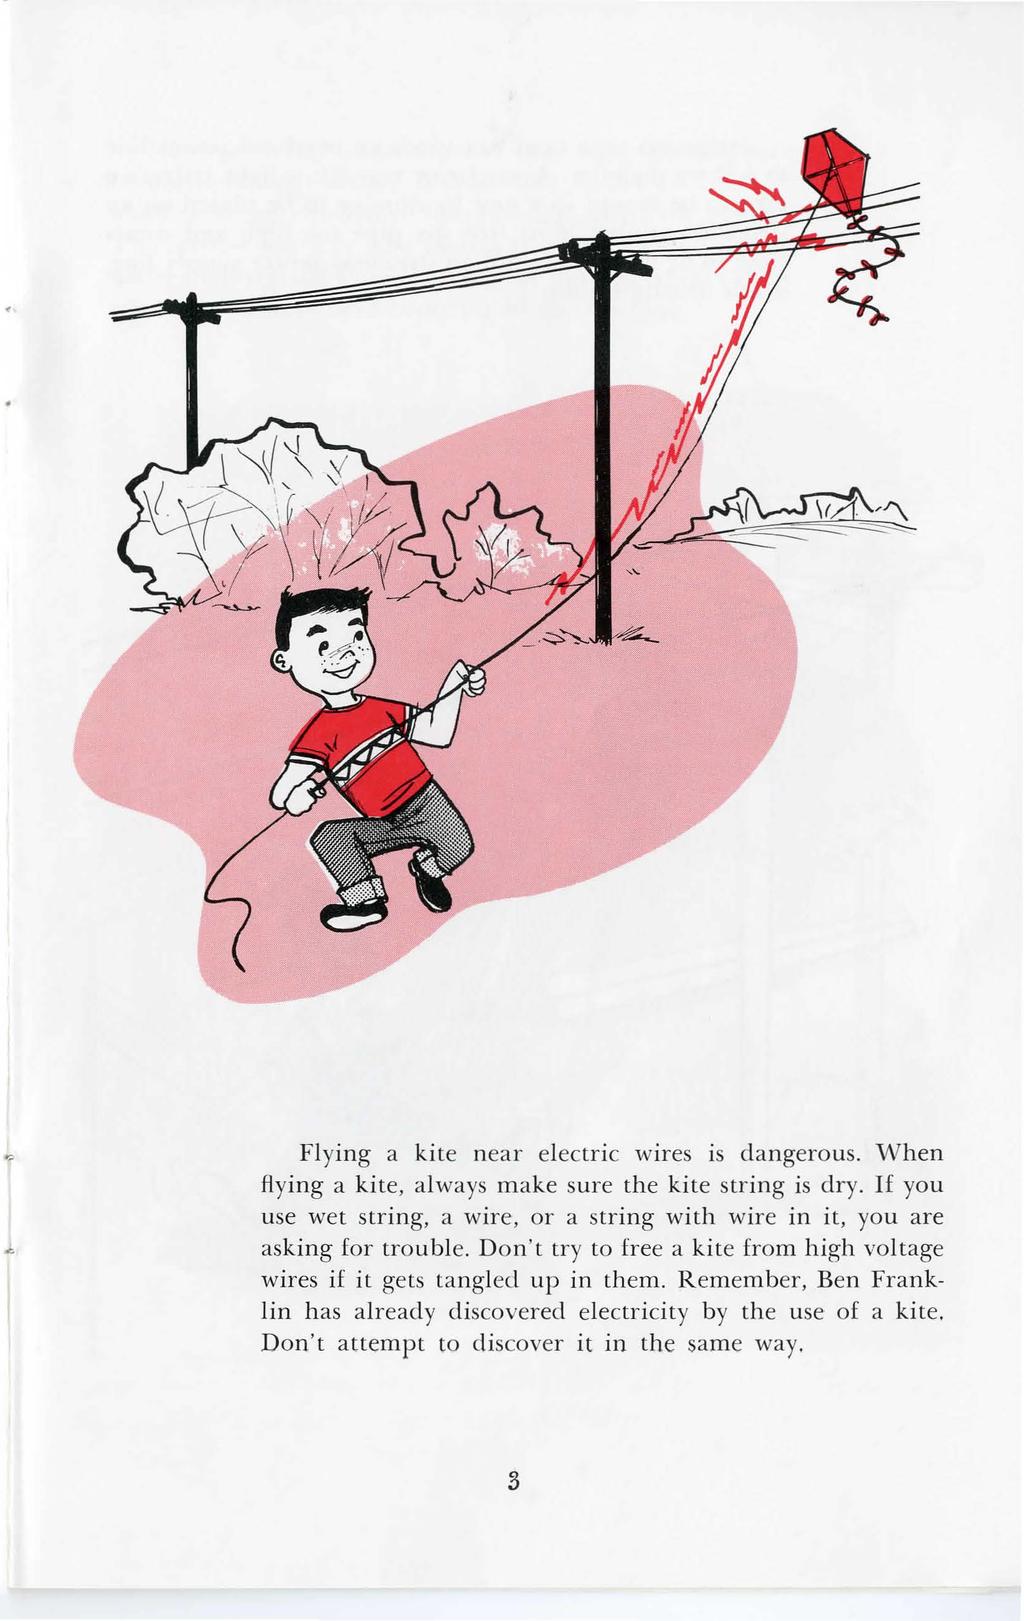 Flying a kite near electric wires is dangerous. W hen fl ying a kite, always make sure the kite string is dry. If you use wet string, a wire, or a string with wire in it, you are asking for trouble.